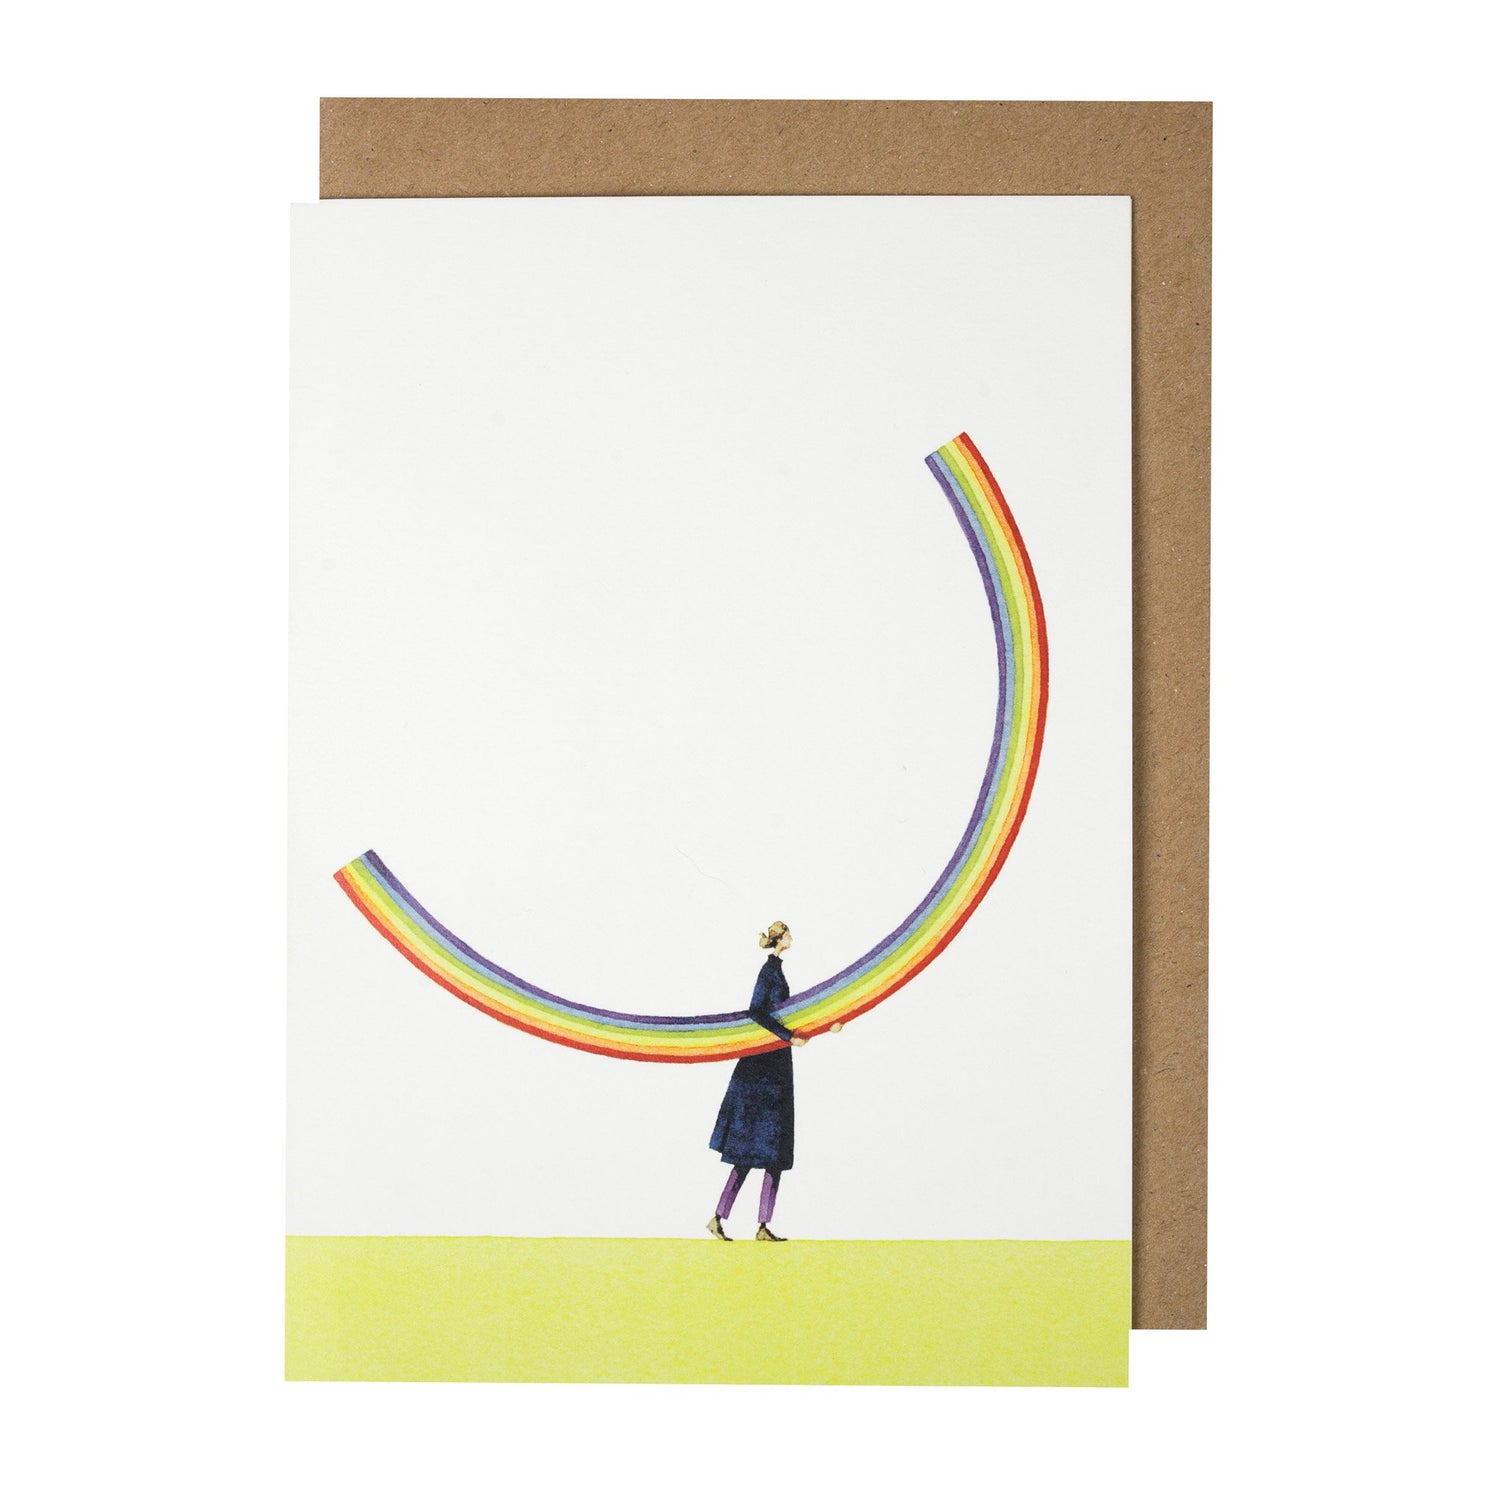 environmentally sustainable paper, compostable packaging, recycled paper, made in england, illustration, rainbow girl, rainbow